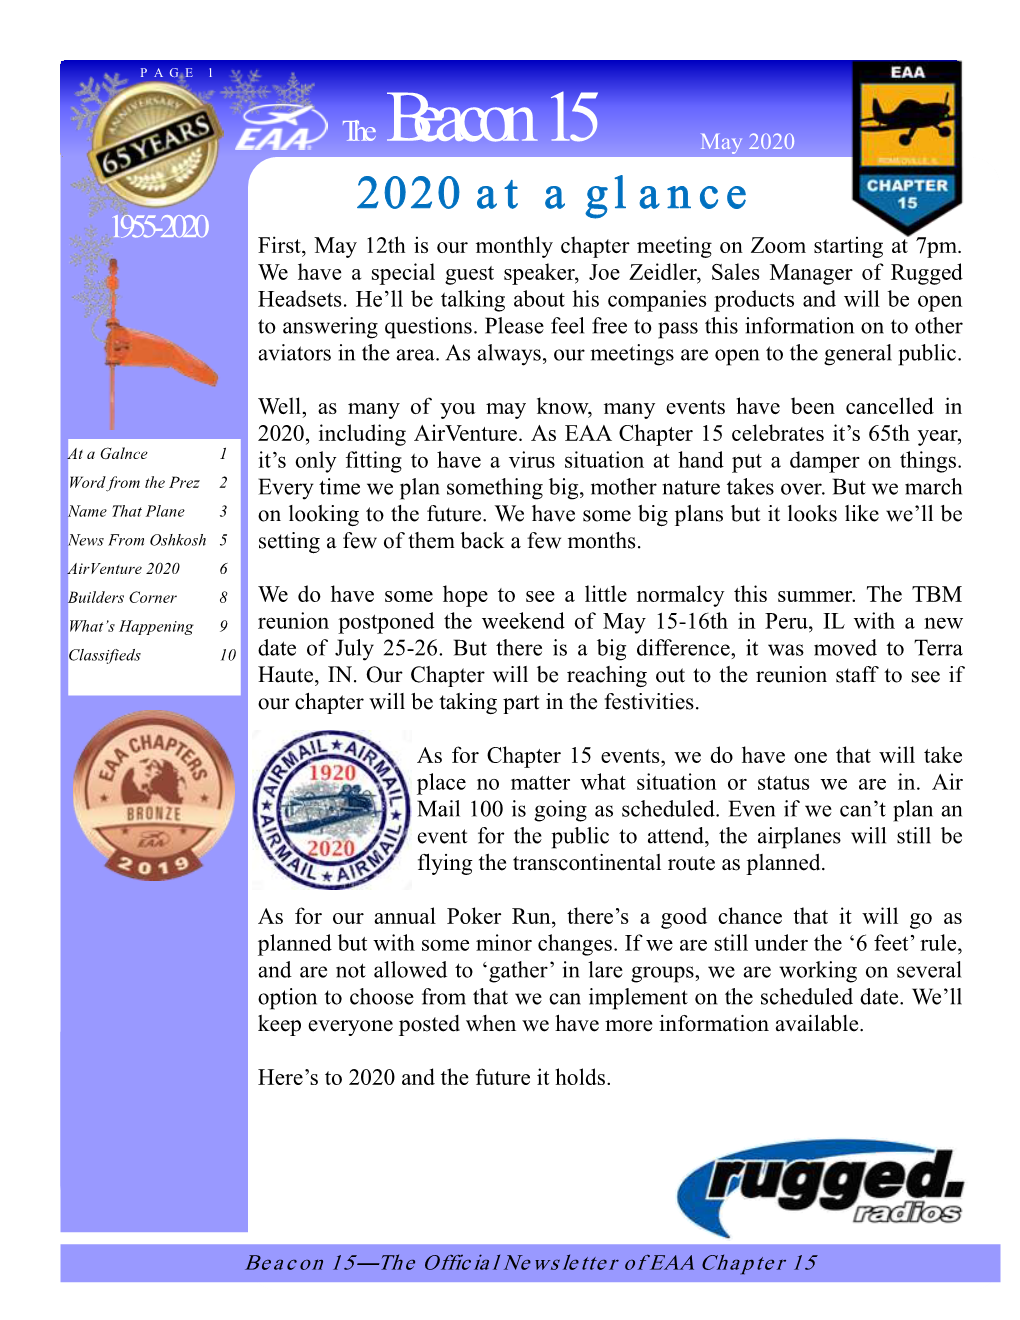 The Beacon 15 May 2020 2020 at a Glance 1955-2020 First, May 12Th Is Our Monthly Chapter Meeting on Zoom Starting at 7Pm